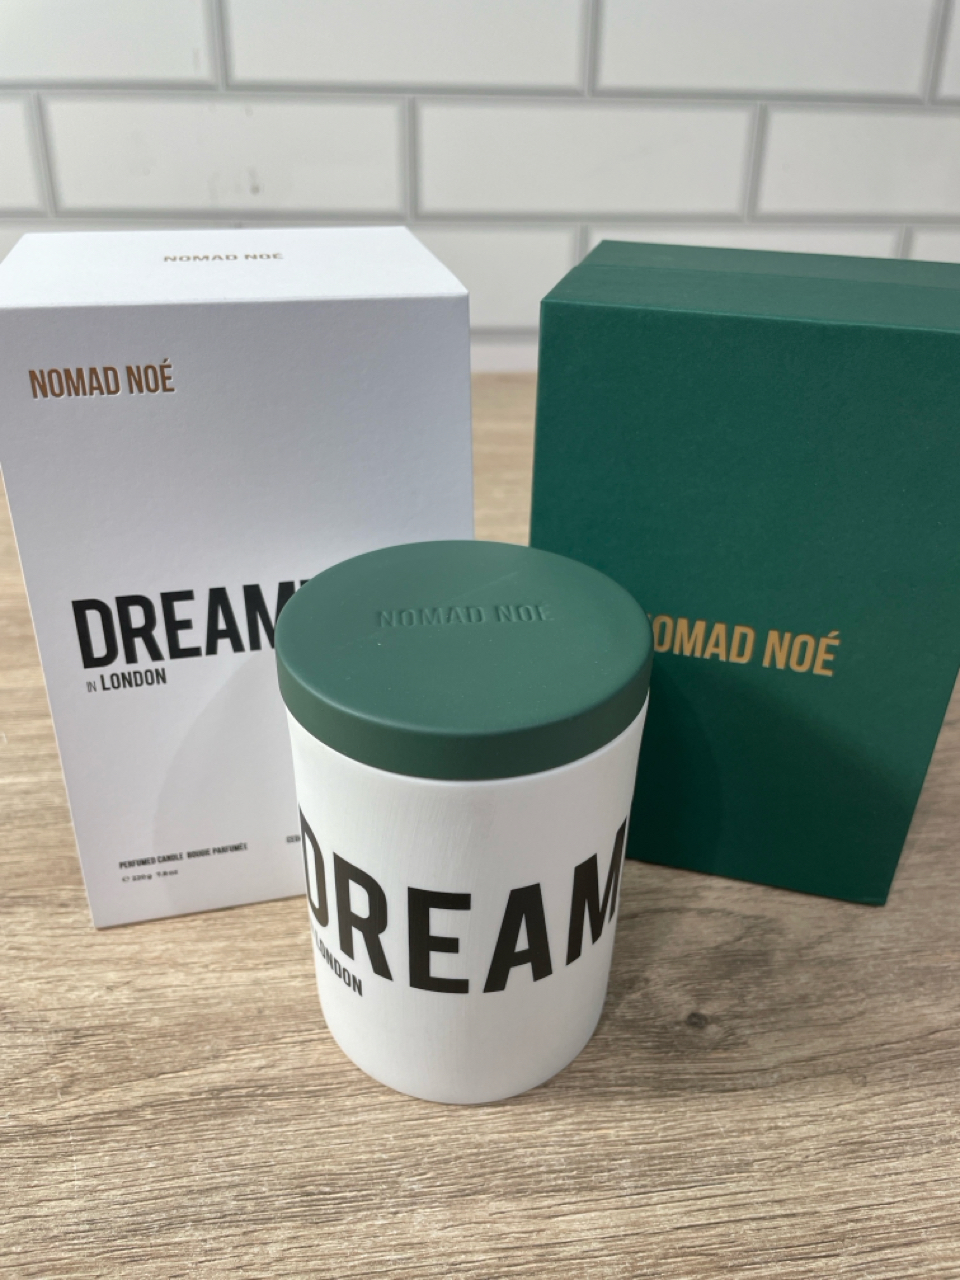 Dreamer Scented Candle from Nomad Noe - Image 4 of 4